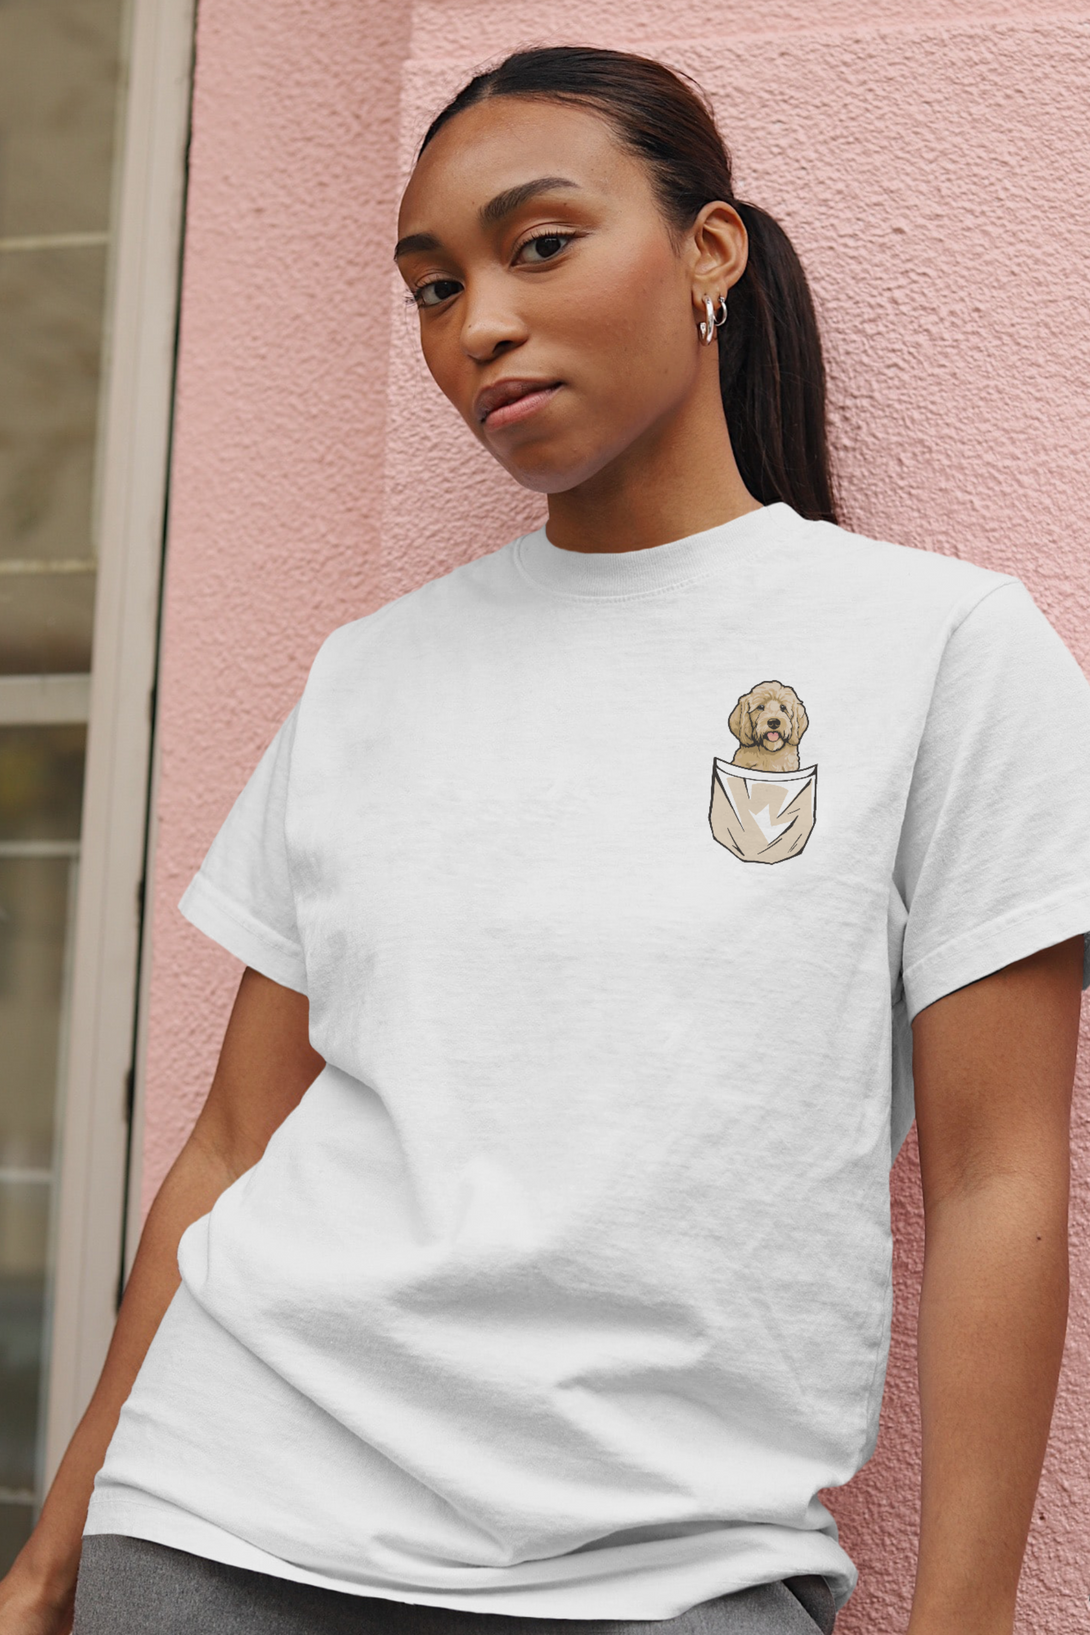 Puppy In Pocket Printed Oversized T-Shirt For Women - WowWaves - 3